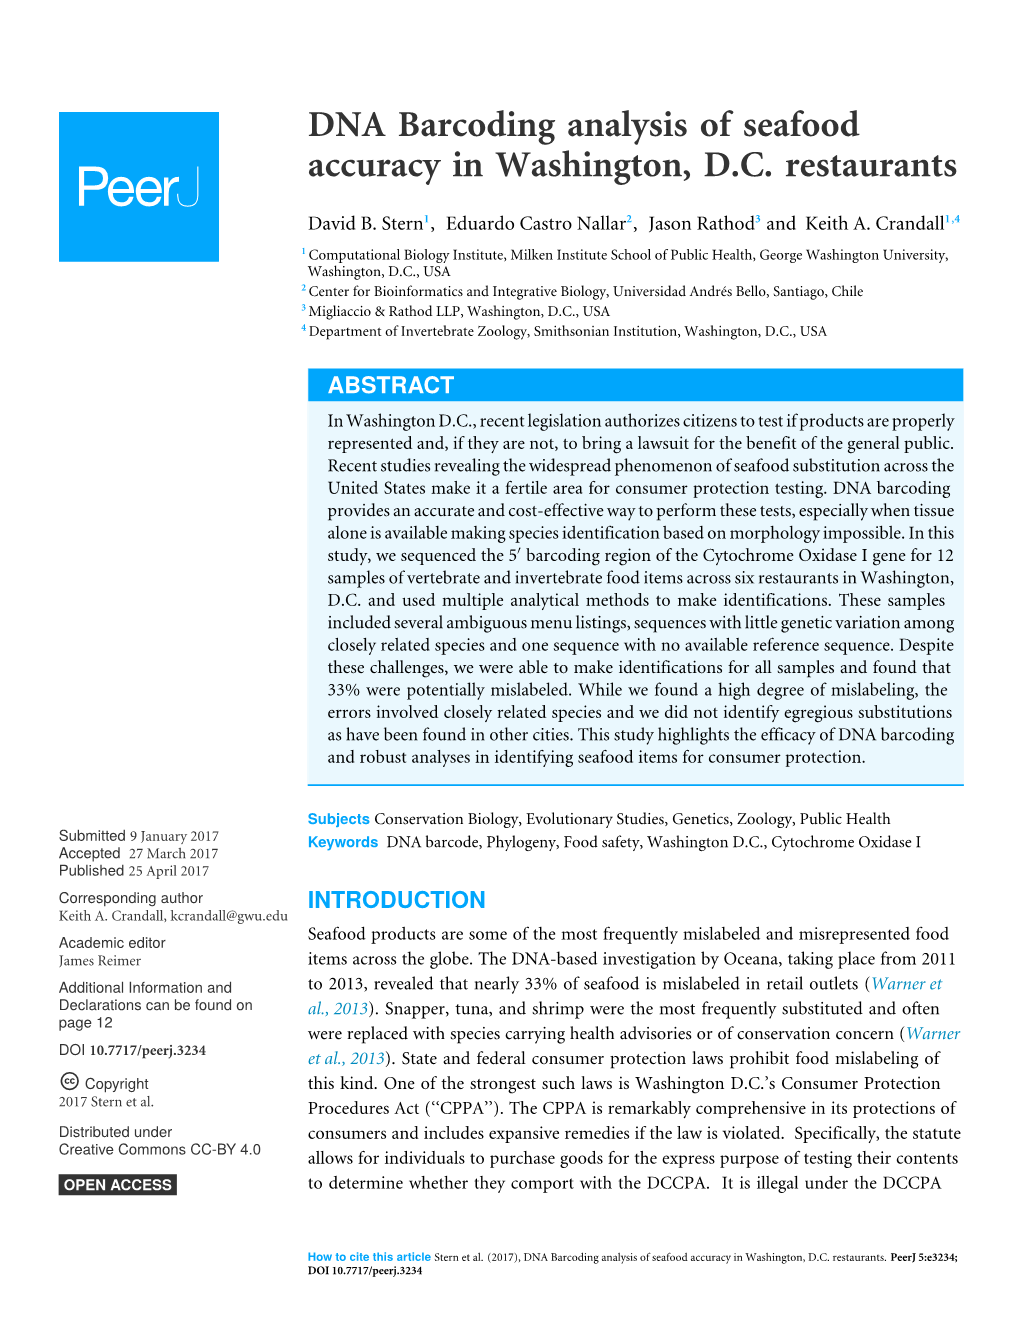 DNA Barcoding Analysis of Seafood Accuracy in Washington, D.C. Restaurants